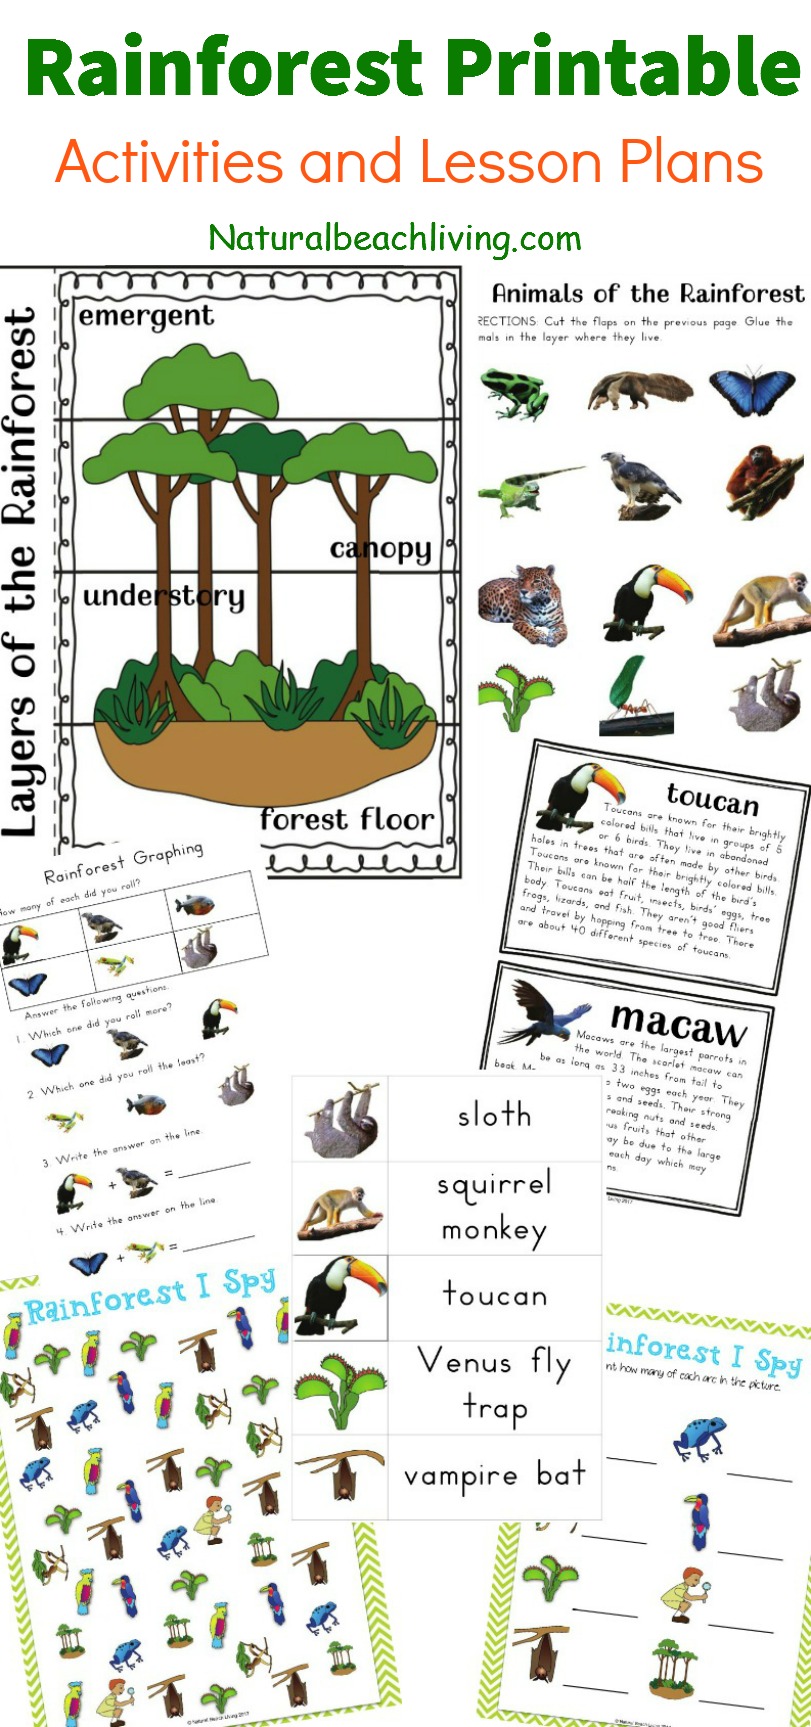 Rainforest Printable Activities and Lesson Plans